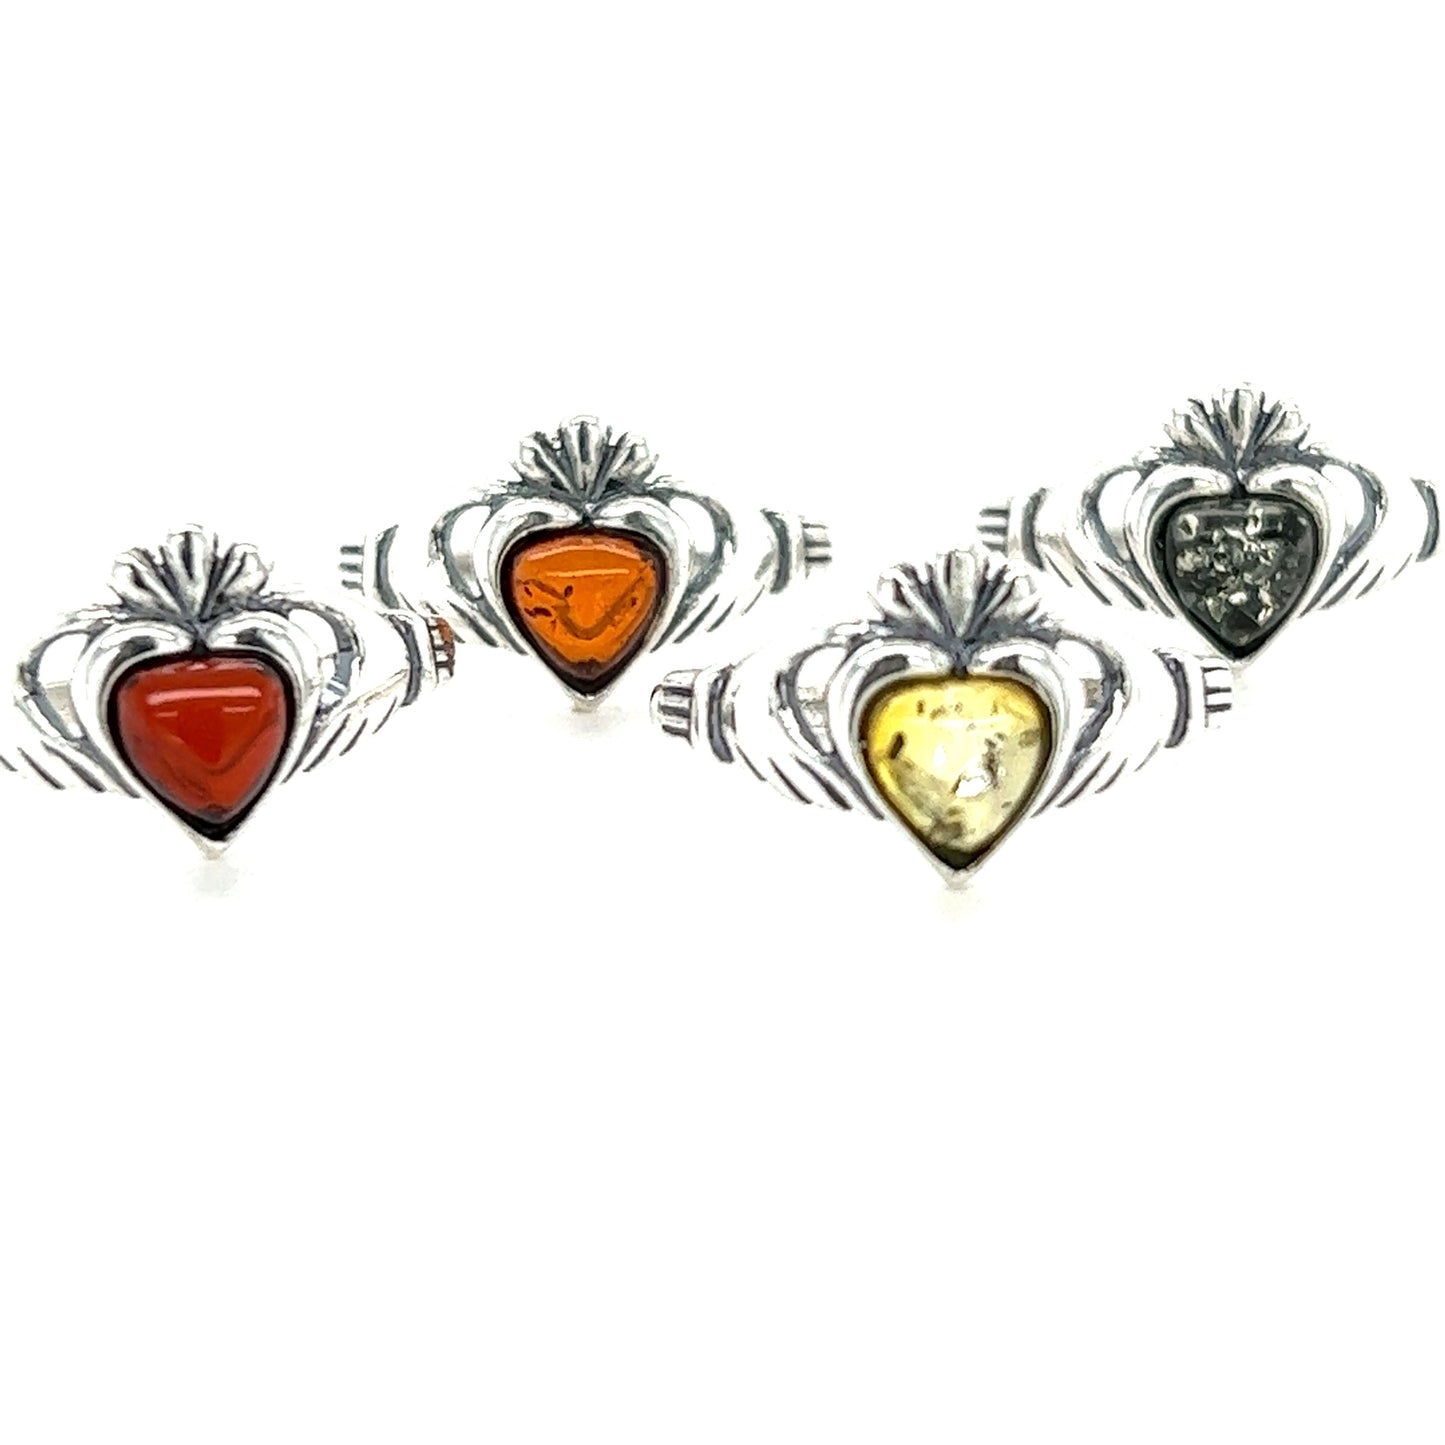 
                  
                    Four Claddagh Amber Heart Rings with red and orange stones. Made from .925 Sterling Silver, these rings feature Claddagh designs and are adorned with beautiful Baltic amber stones. They symbolize love and friendship. (Brand Name: Super Silver)
                  
                